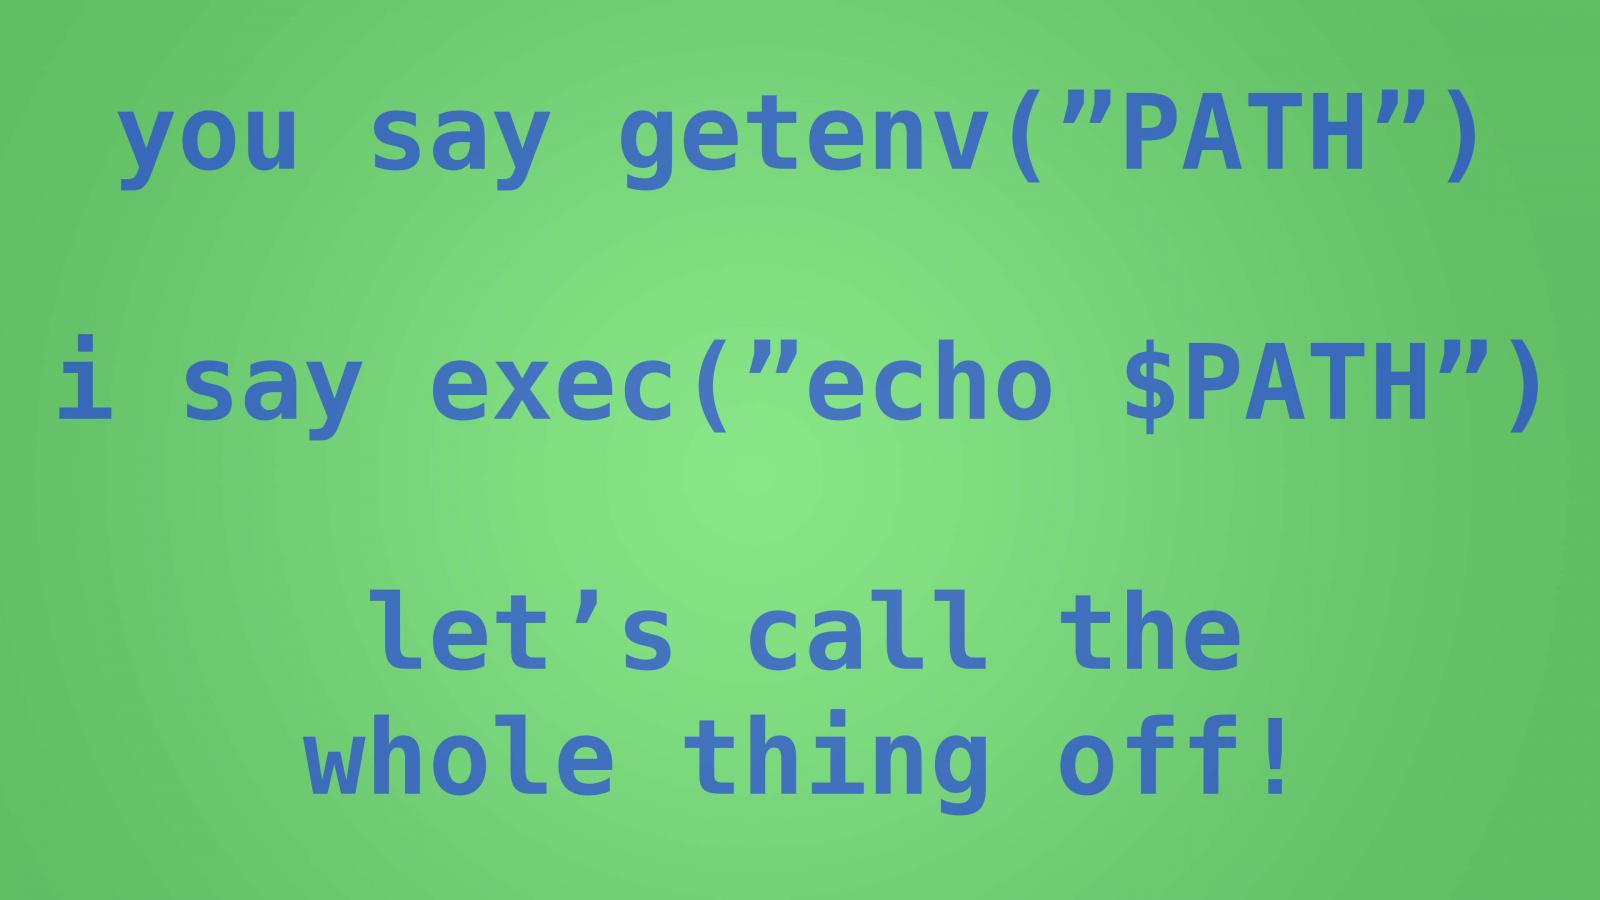 you say getenv("PATH"), i say exec("echo $PATH"), let's call the whole thing off!